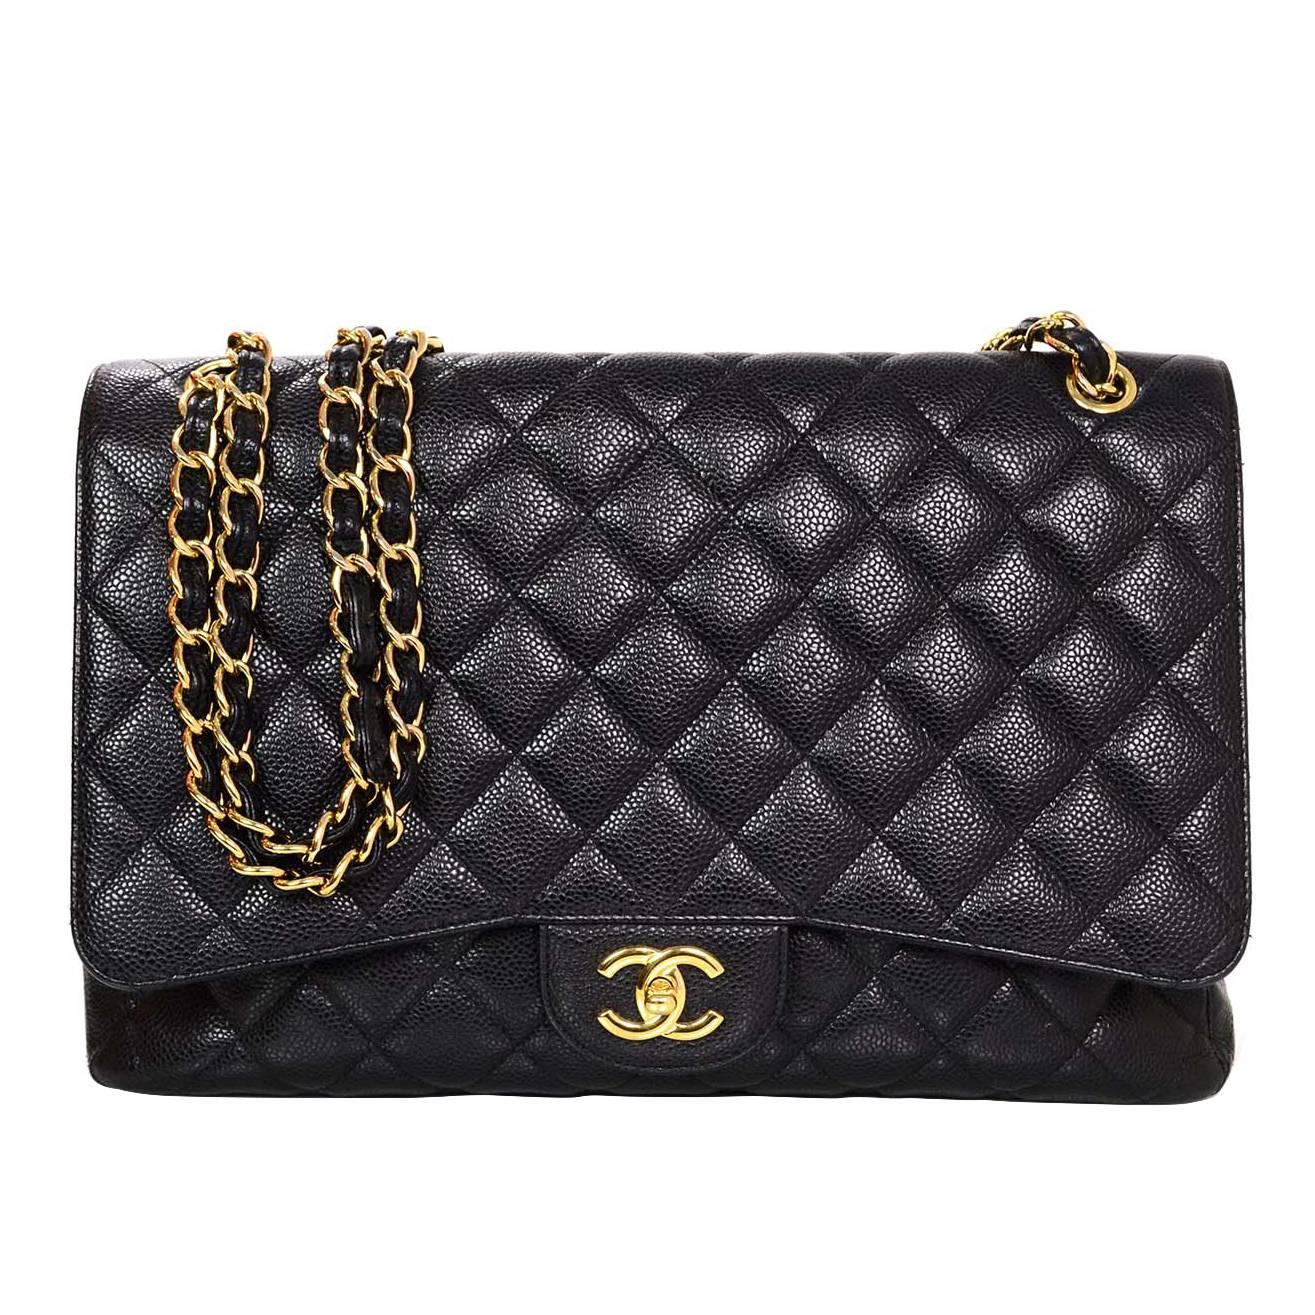 Chanel Black Caviar Leather Quilted Single Flap Maxi Bag GHW rt. $6, 000